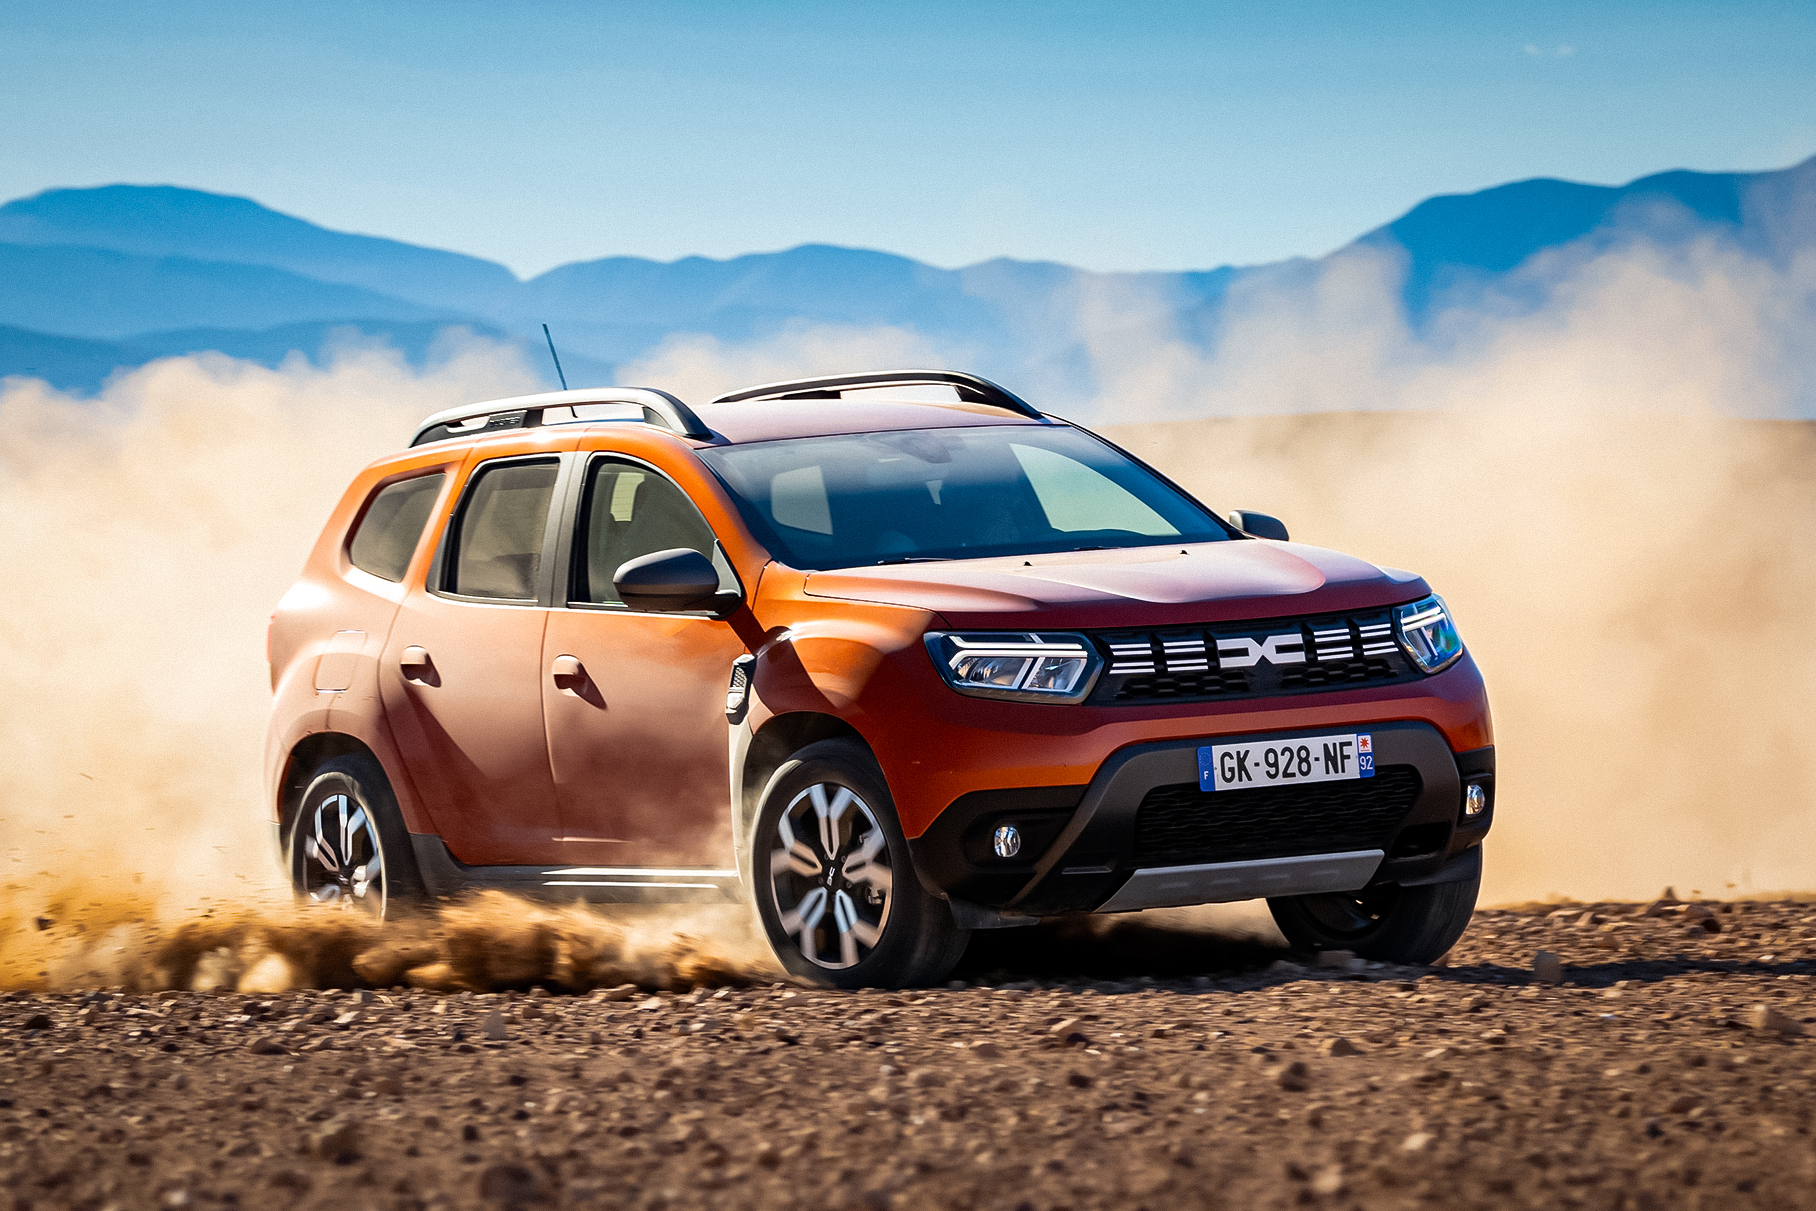 Dacia wants to compete with Jeep in Europe